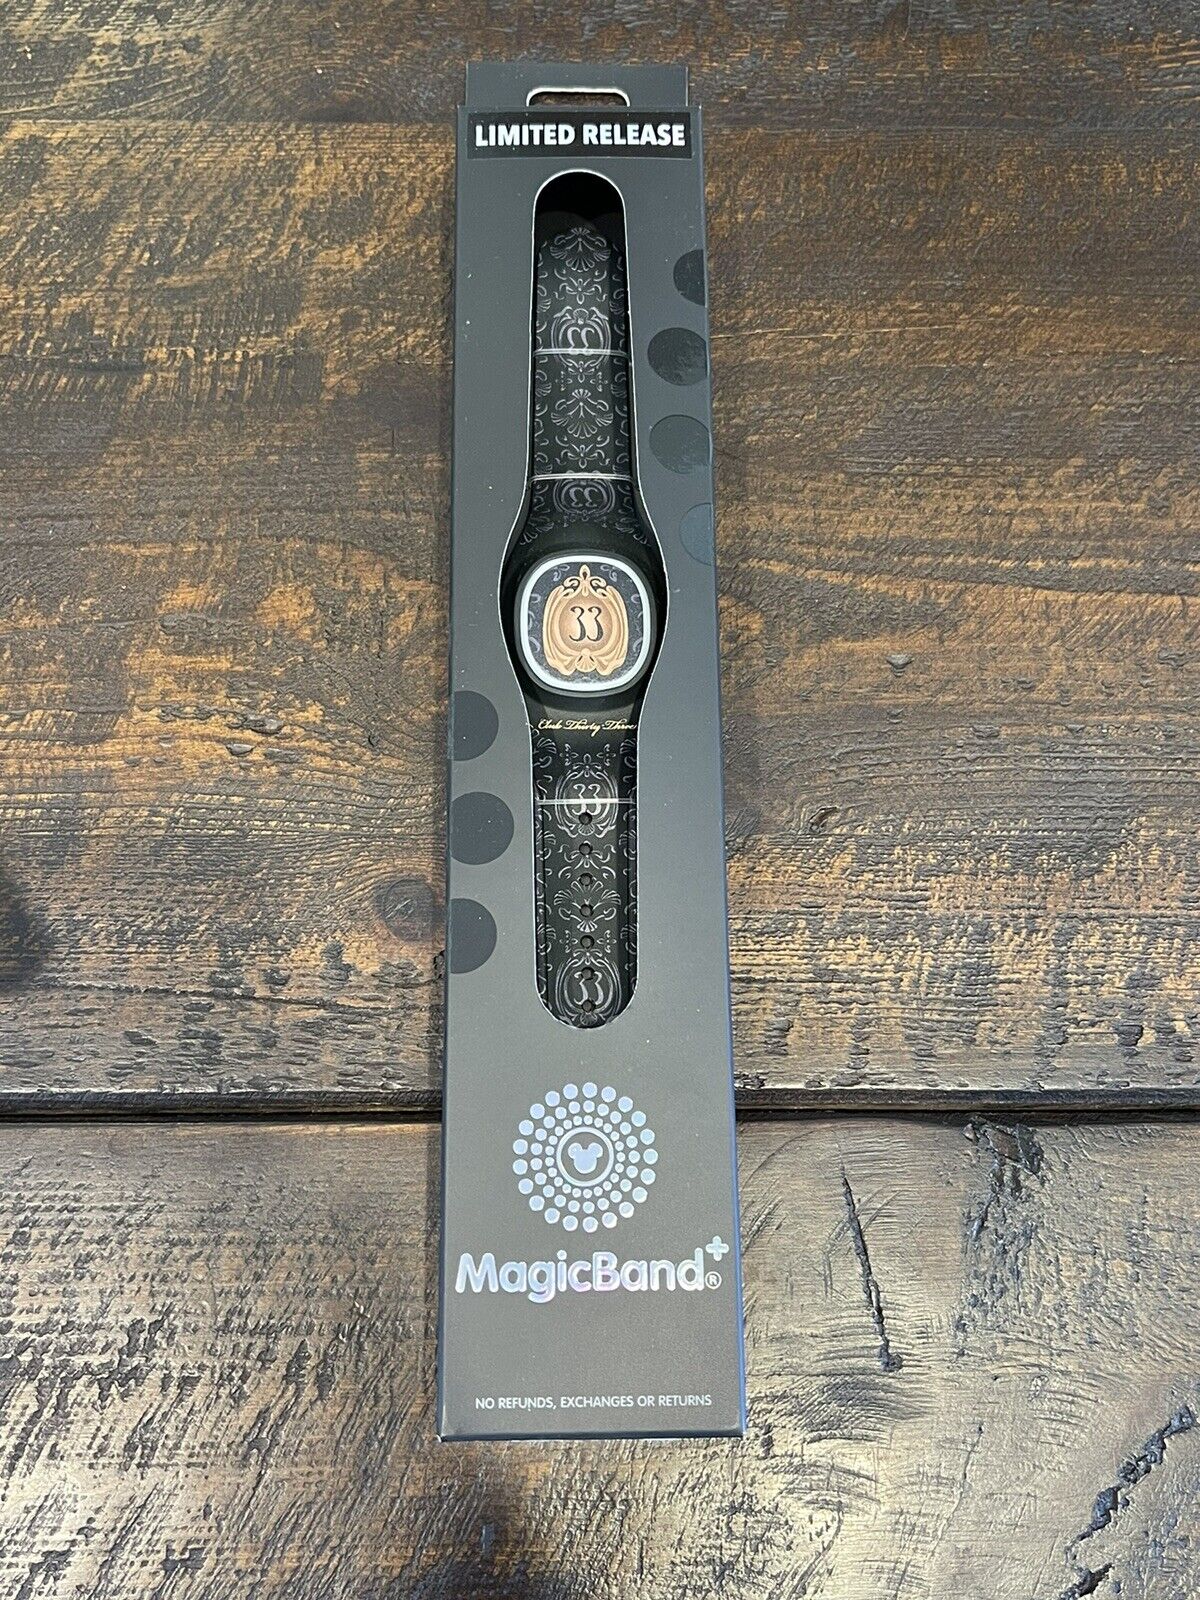 CLUB 33 Disneyland Magic Band+ Limited Release New In Box. SOLD OUT Disney